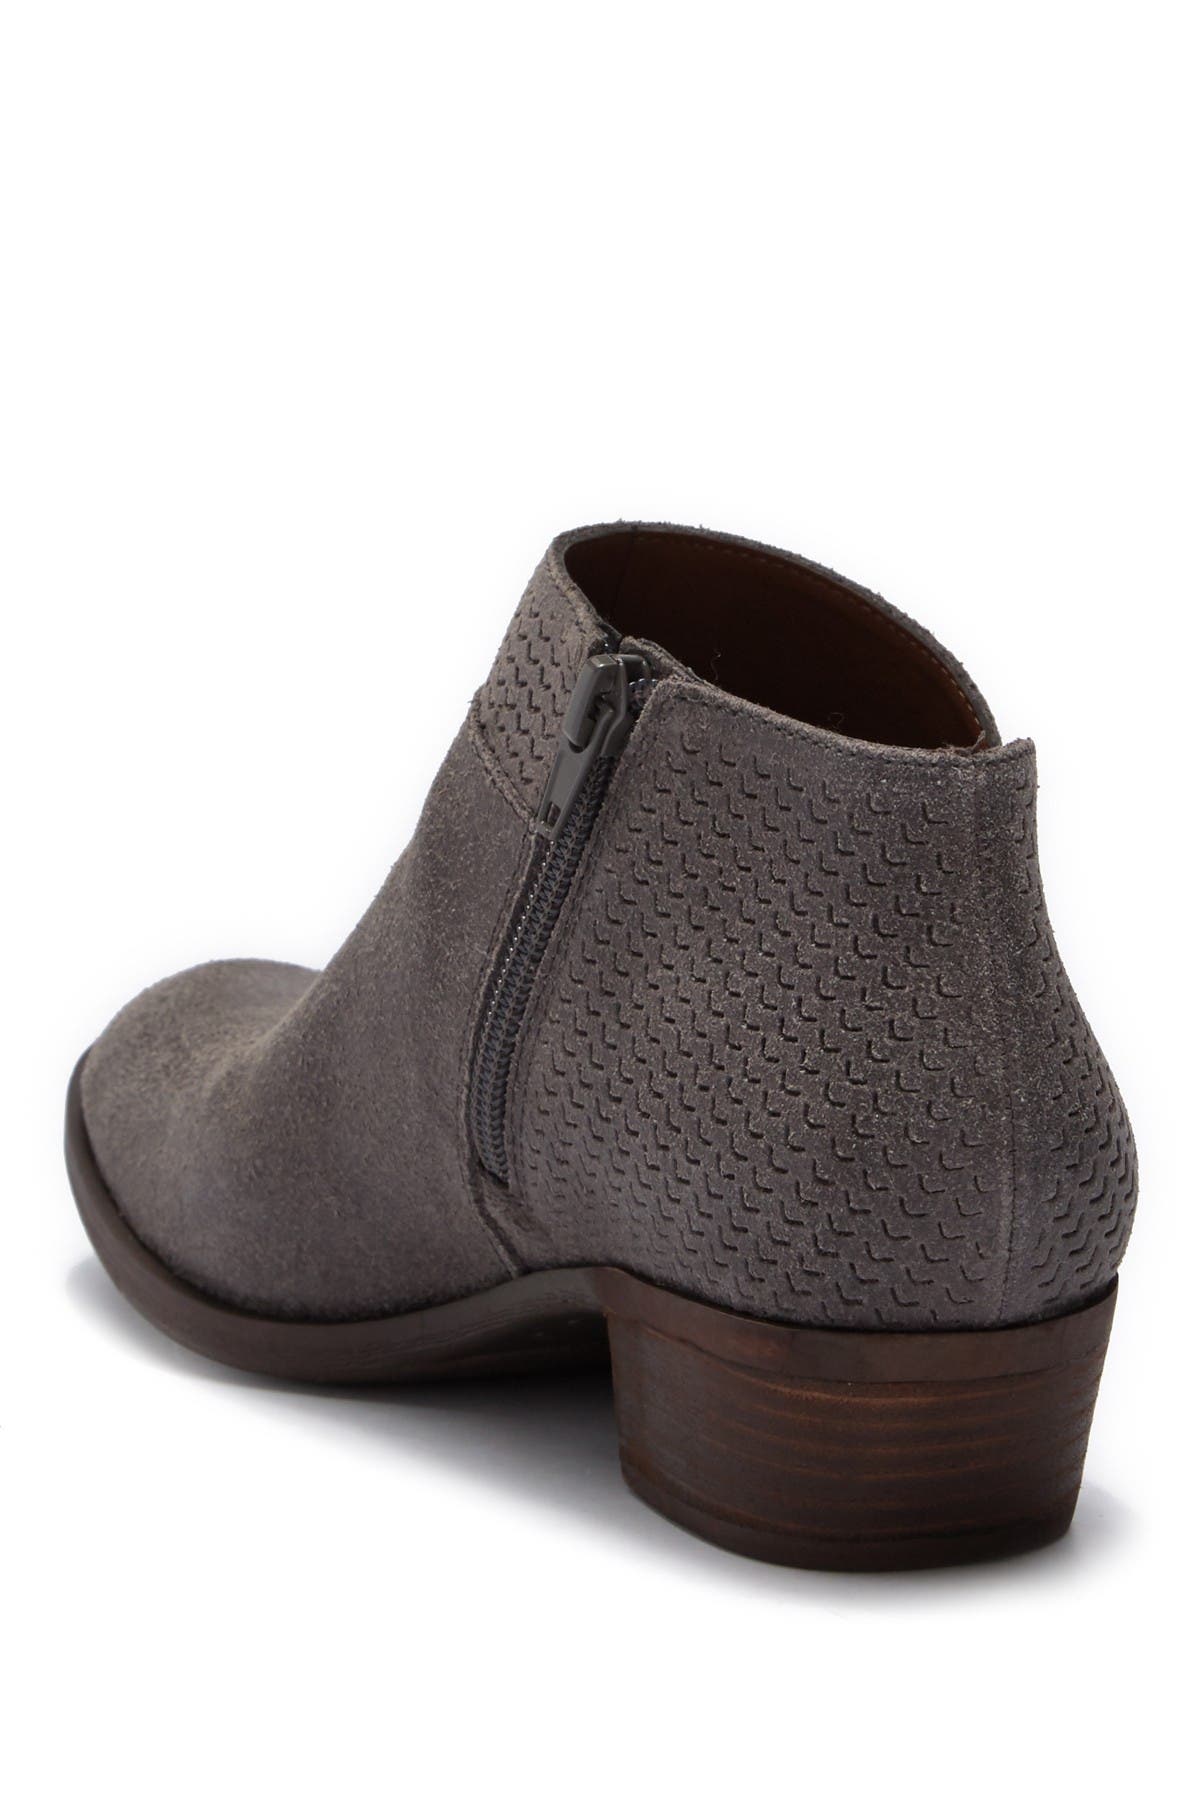 lucky brand perforated suede booties